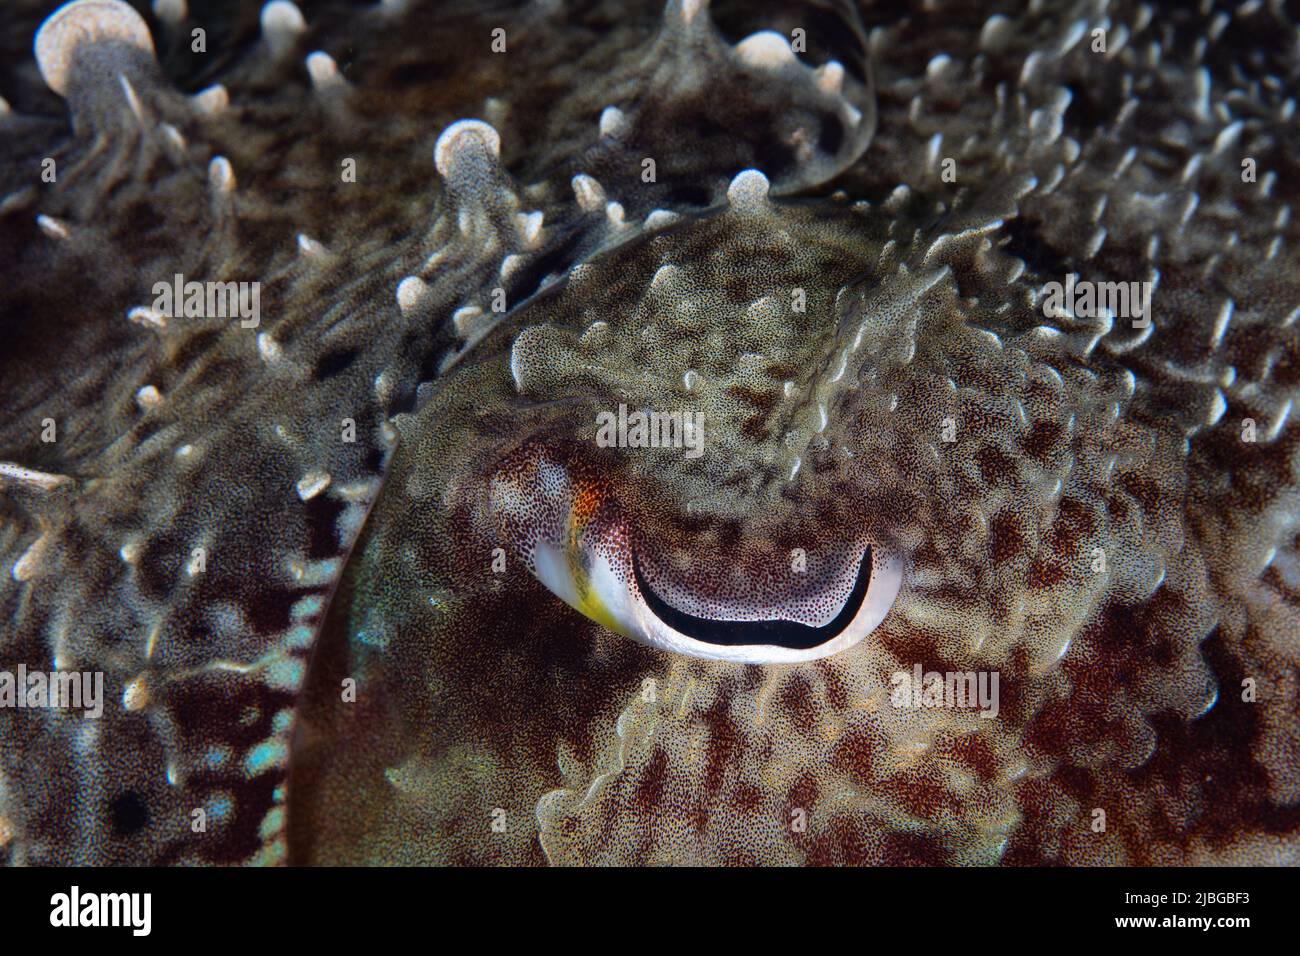 Detail of the eye and textured epidermis of a Broadclub cuttlefish, Sepia latimanus, on a coral reef in Indonesia. These animals are well camouflaged. Stock Photo